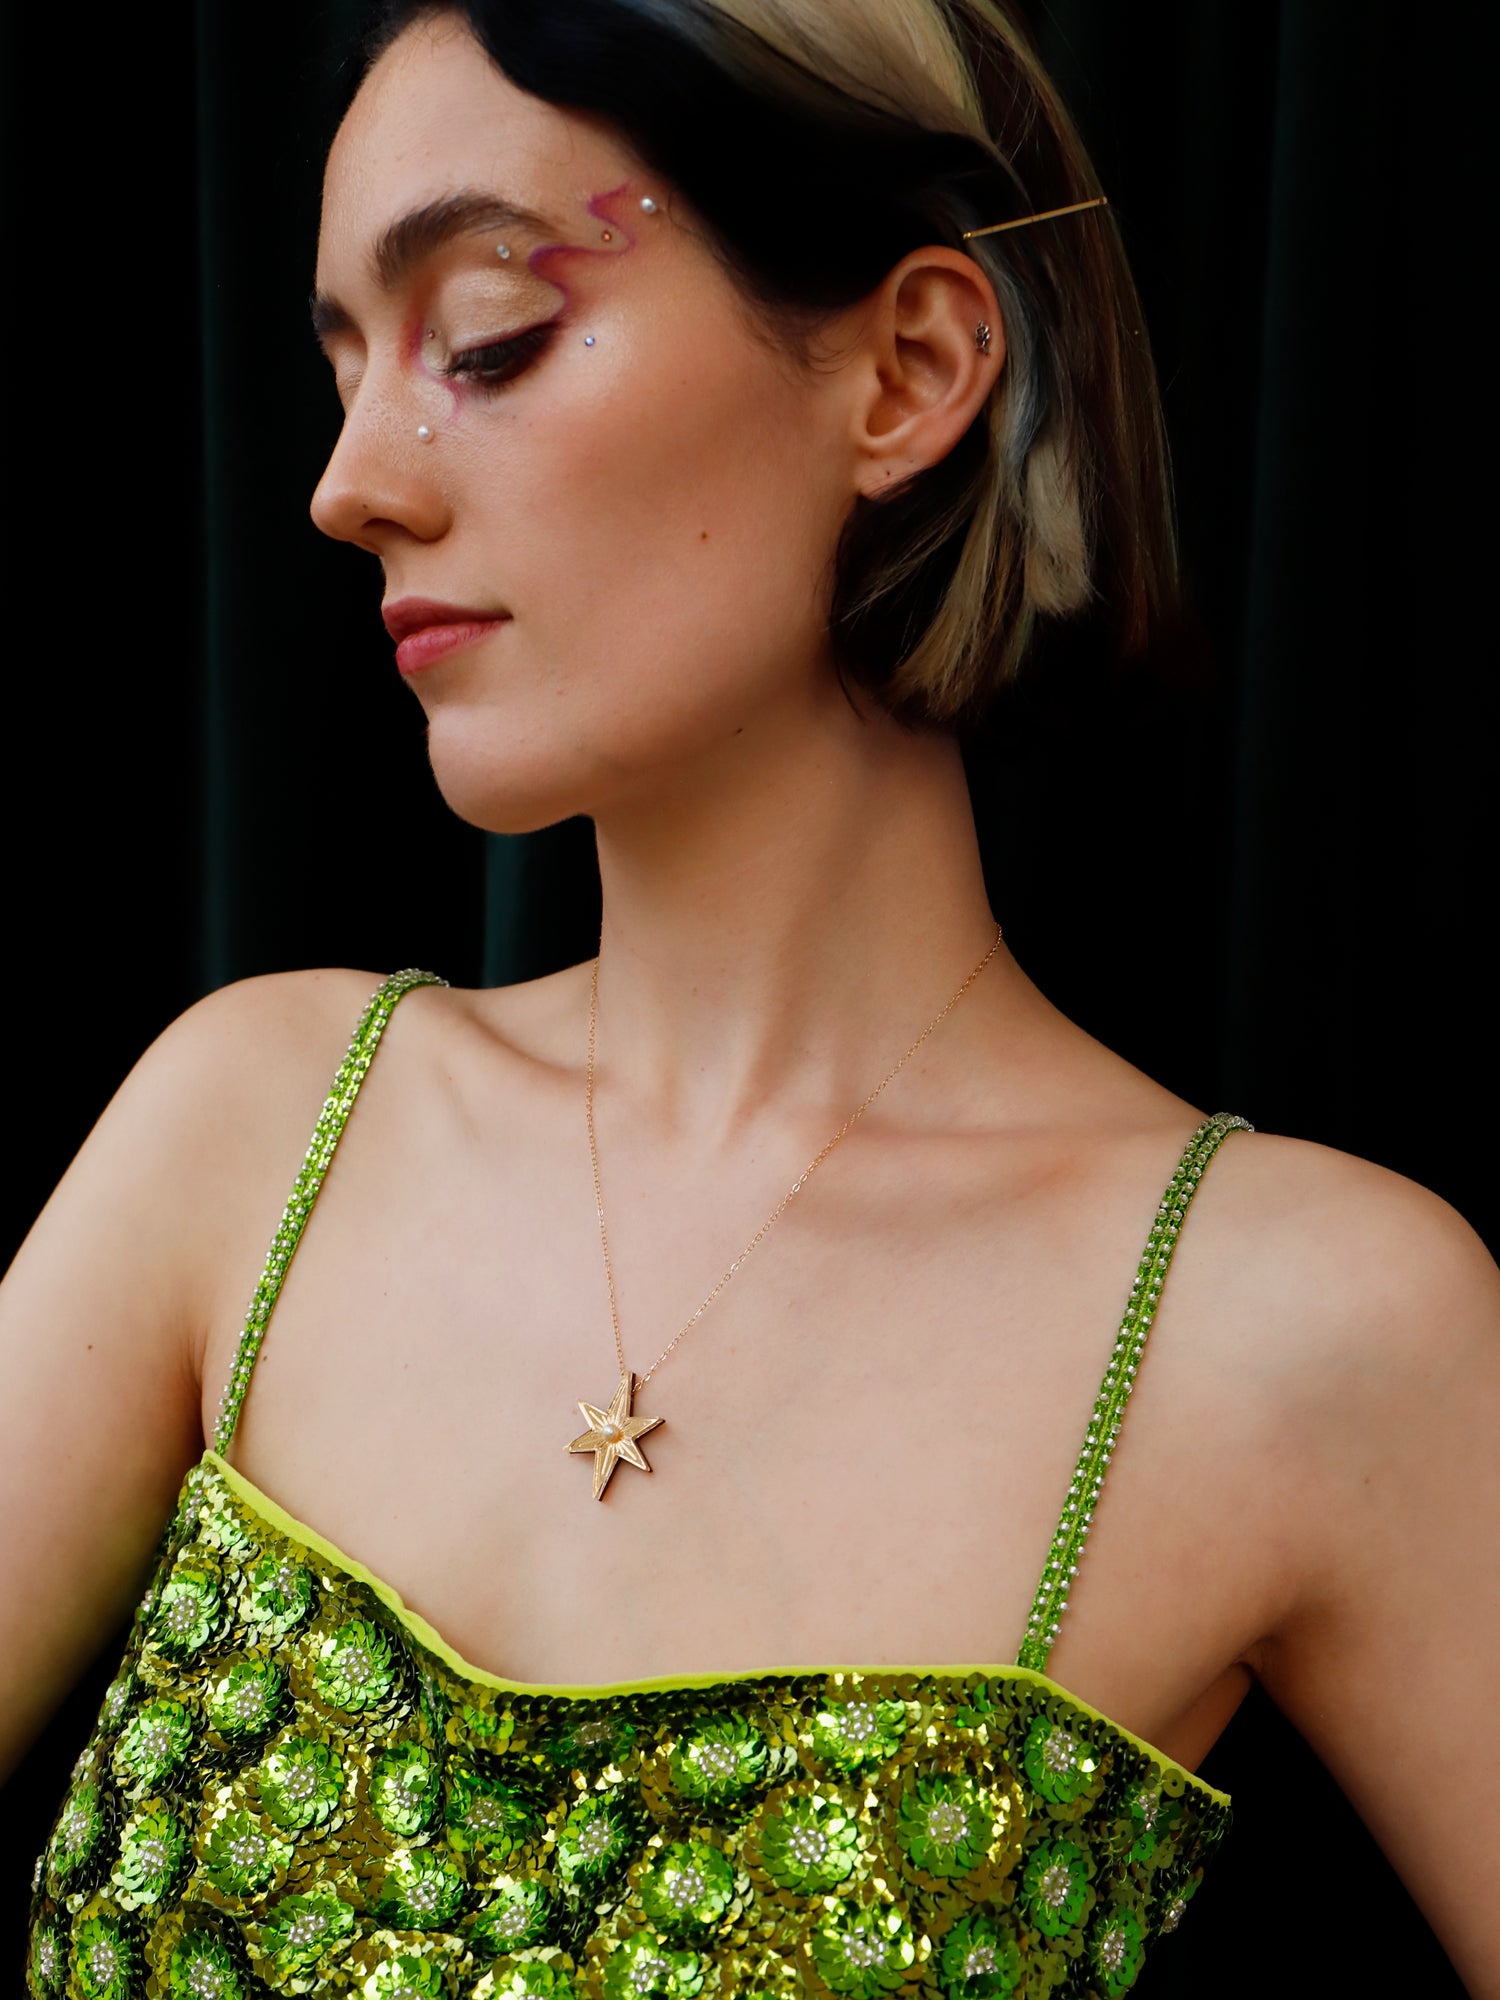 Statement star necklace made with gold mirrored acrylic, embellished with glass pearls and hand inked details. Handmade in London by Wolf & Moon.